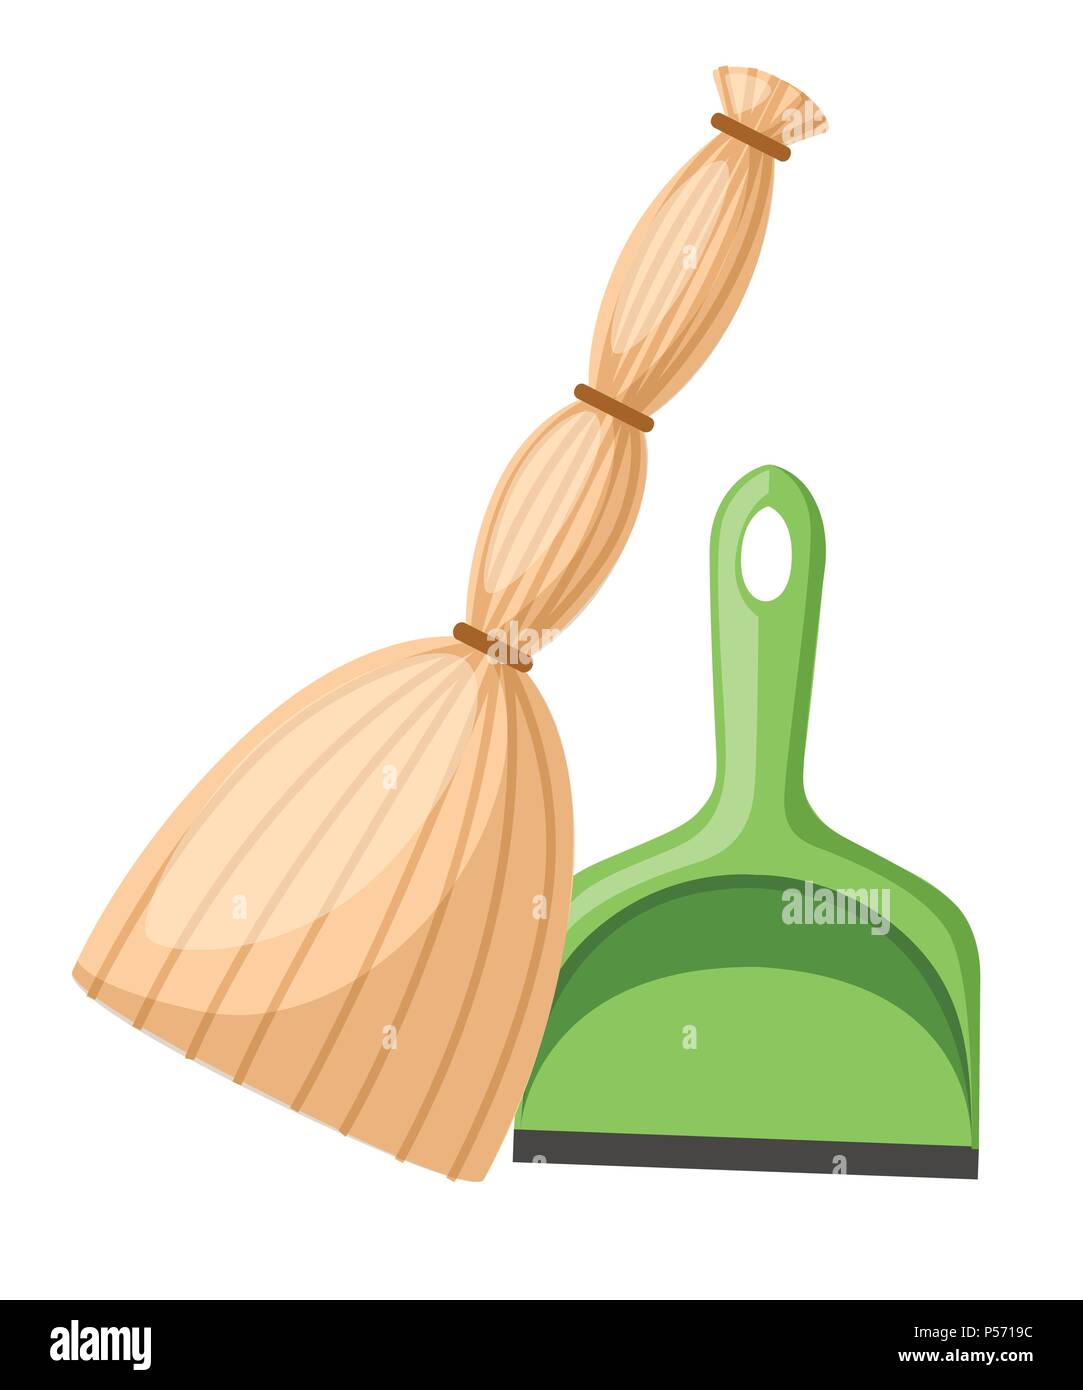 Green plastic dustpan with yellow broom. Flat design style. Cleaning set objects. Vector illustration isolated on white background. Stock Vector